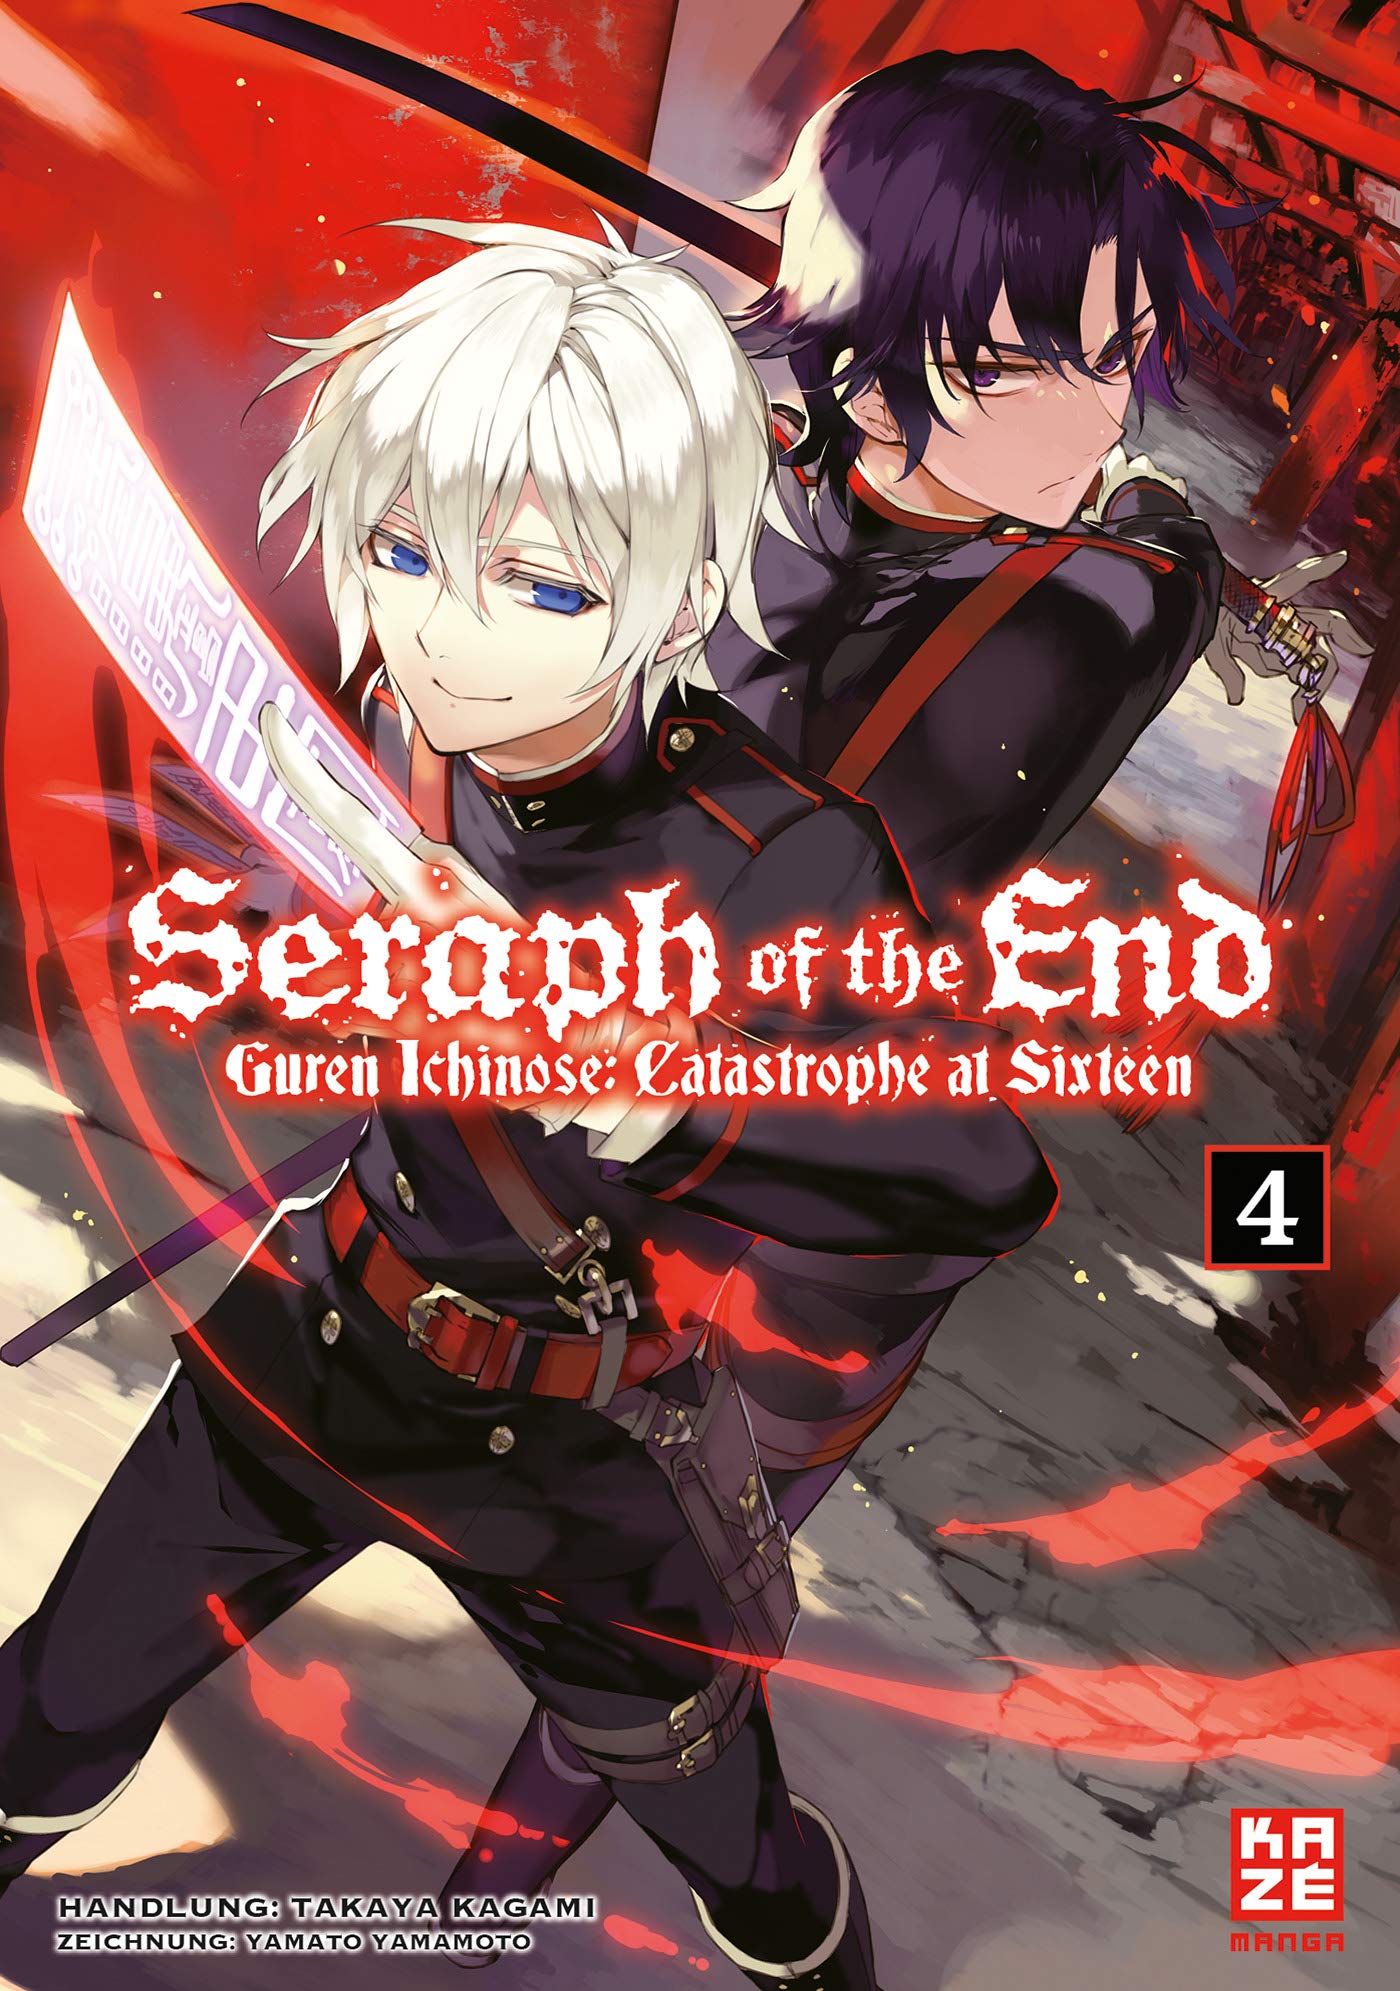 recall the end (anime ed version)